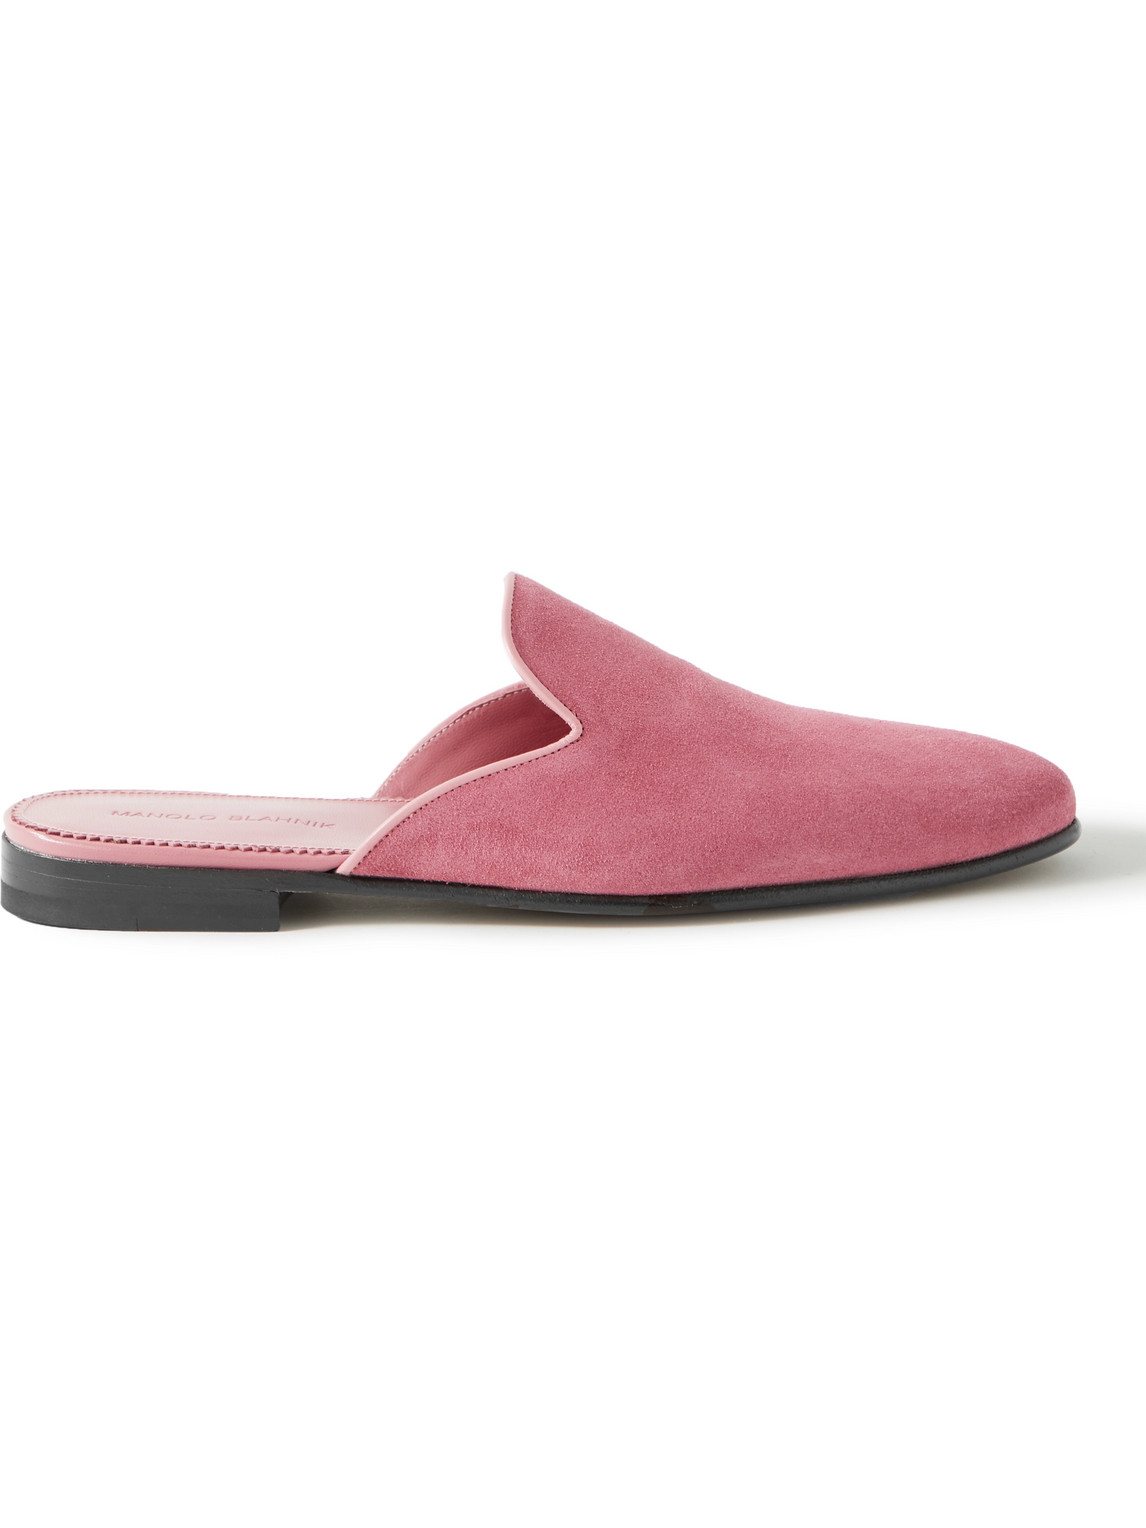 Miriomu Leather-Trimmed Suede Backless Loafers